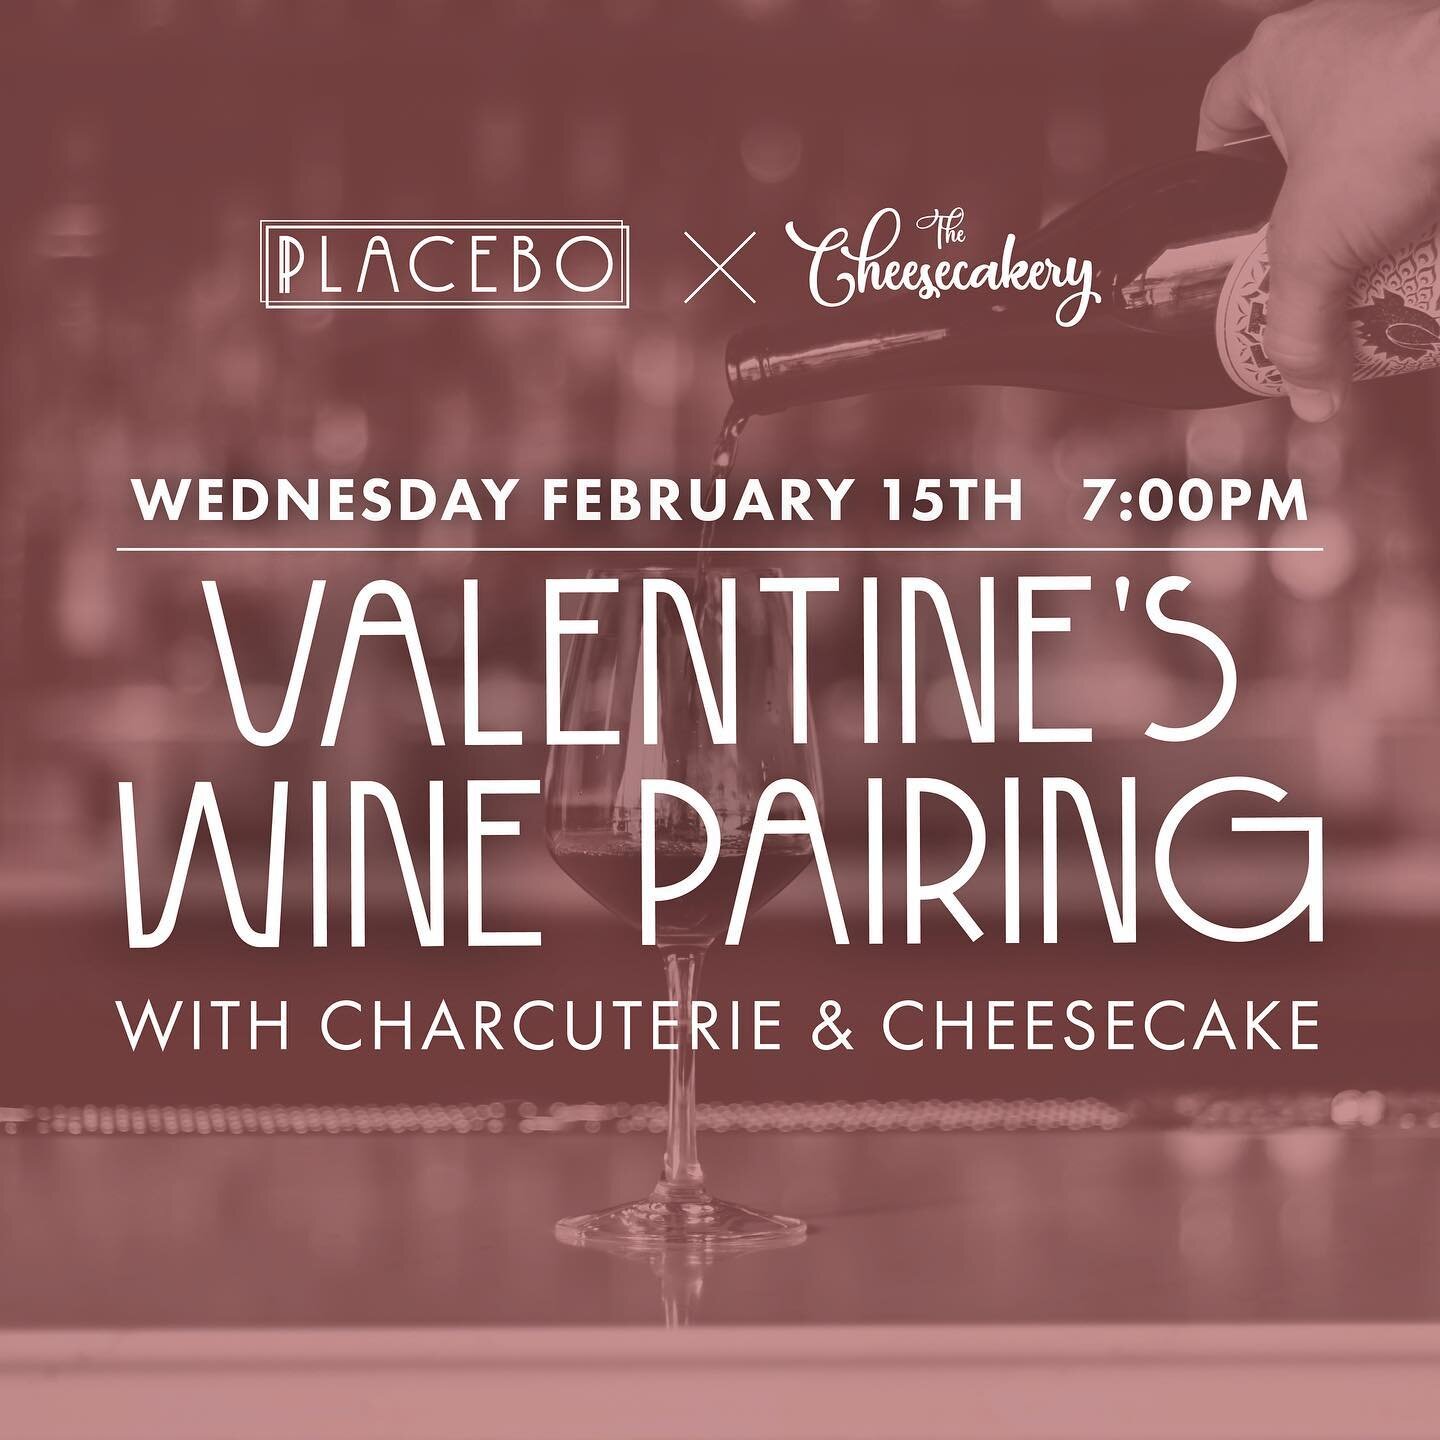 Come celebrate Valentine's with us and enjoy an evening of wine, cheese, meat, and cheesecake!

Tony from Skurnik Wines has curated 4 wines to pair with cheesecake cupcakes from @cincycheesecakery and charcuterie from @elementeatery 🧁🍷

🎟️ $25 per